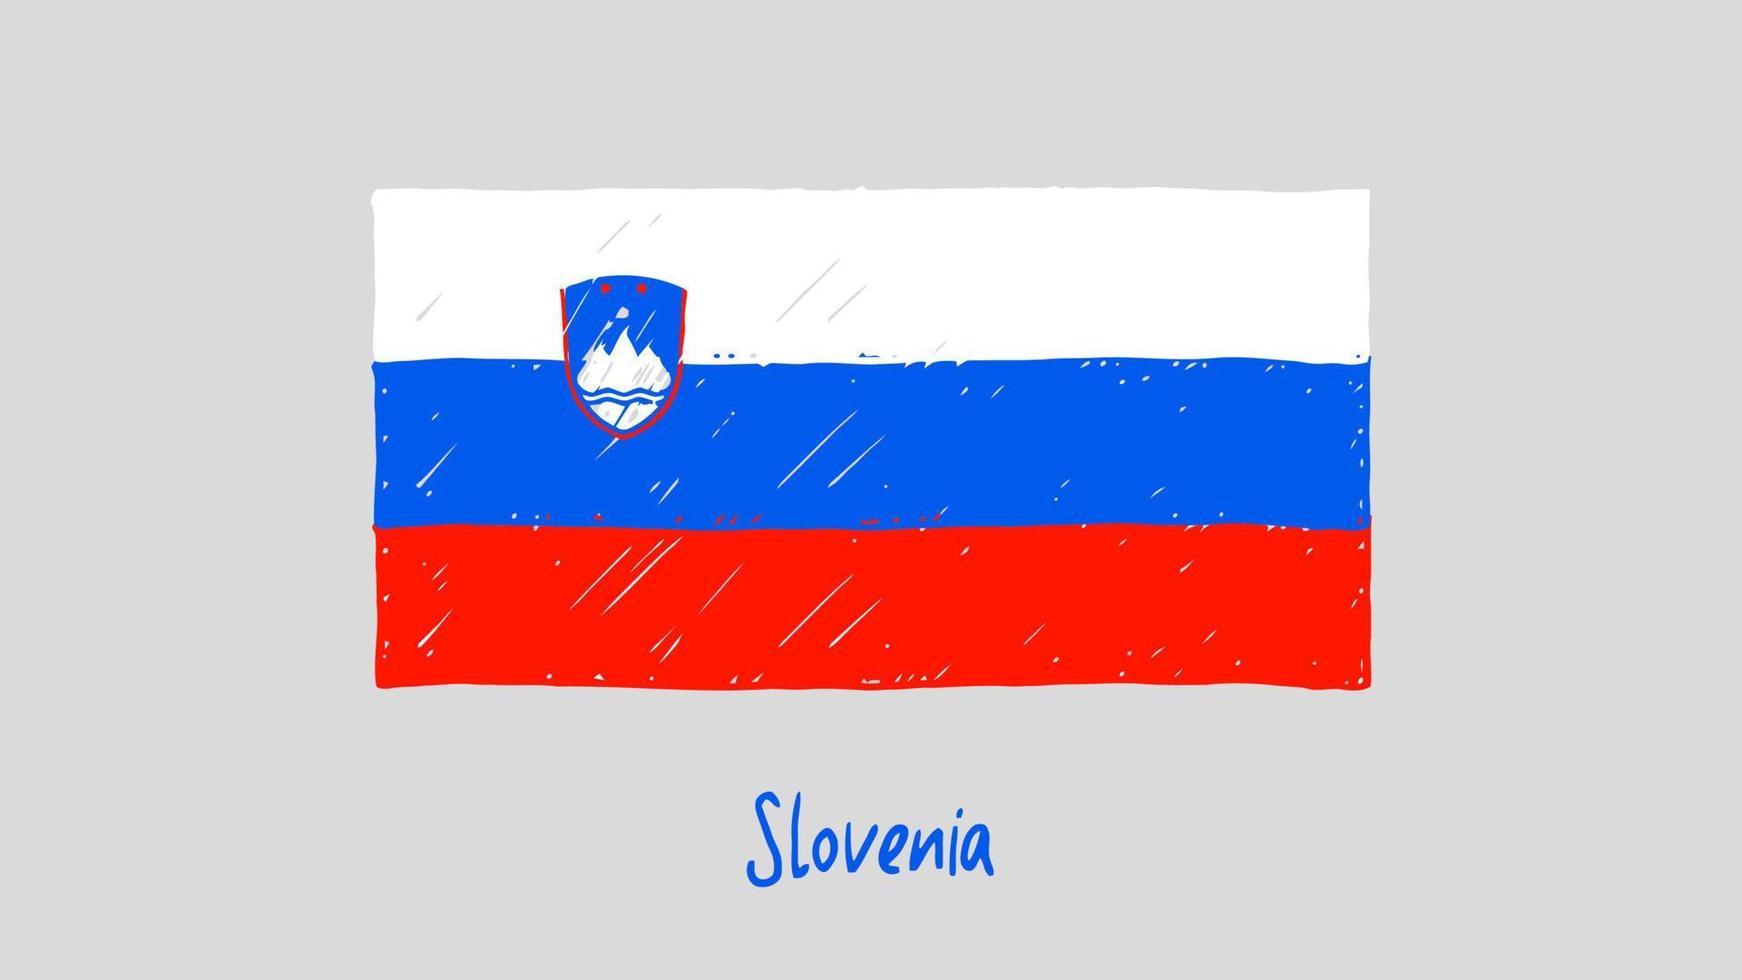 Slovenia National Country Flag Marker or Pencil Sketch Illustration Vector